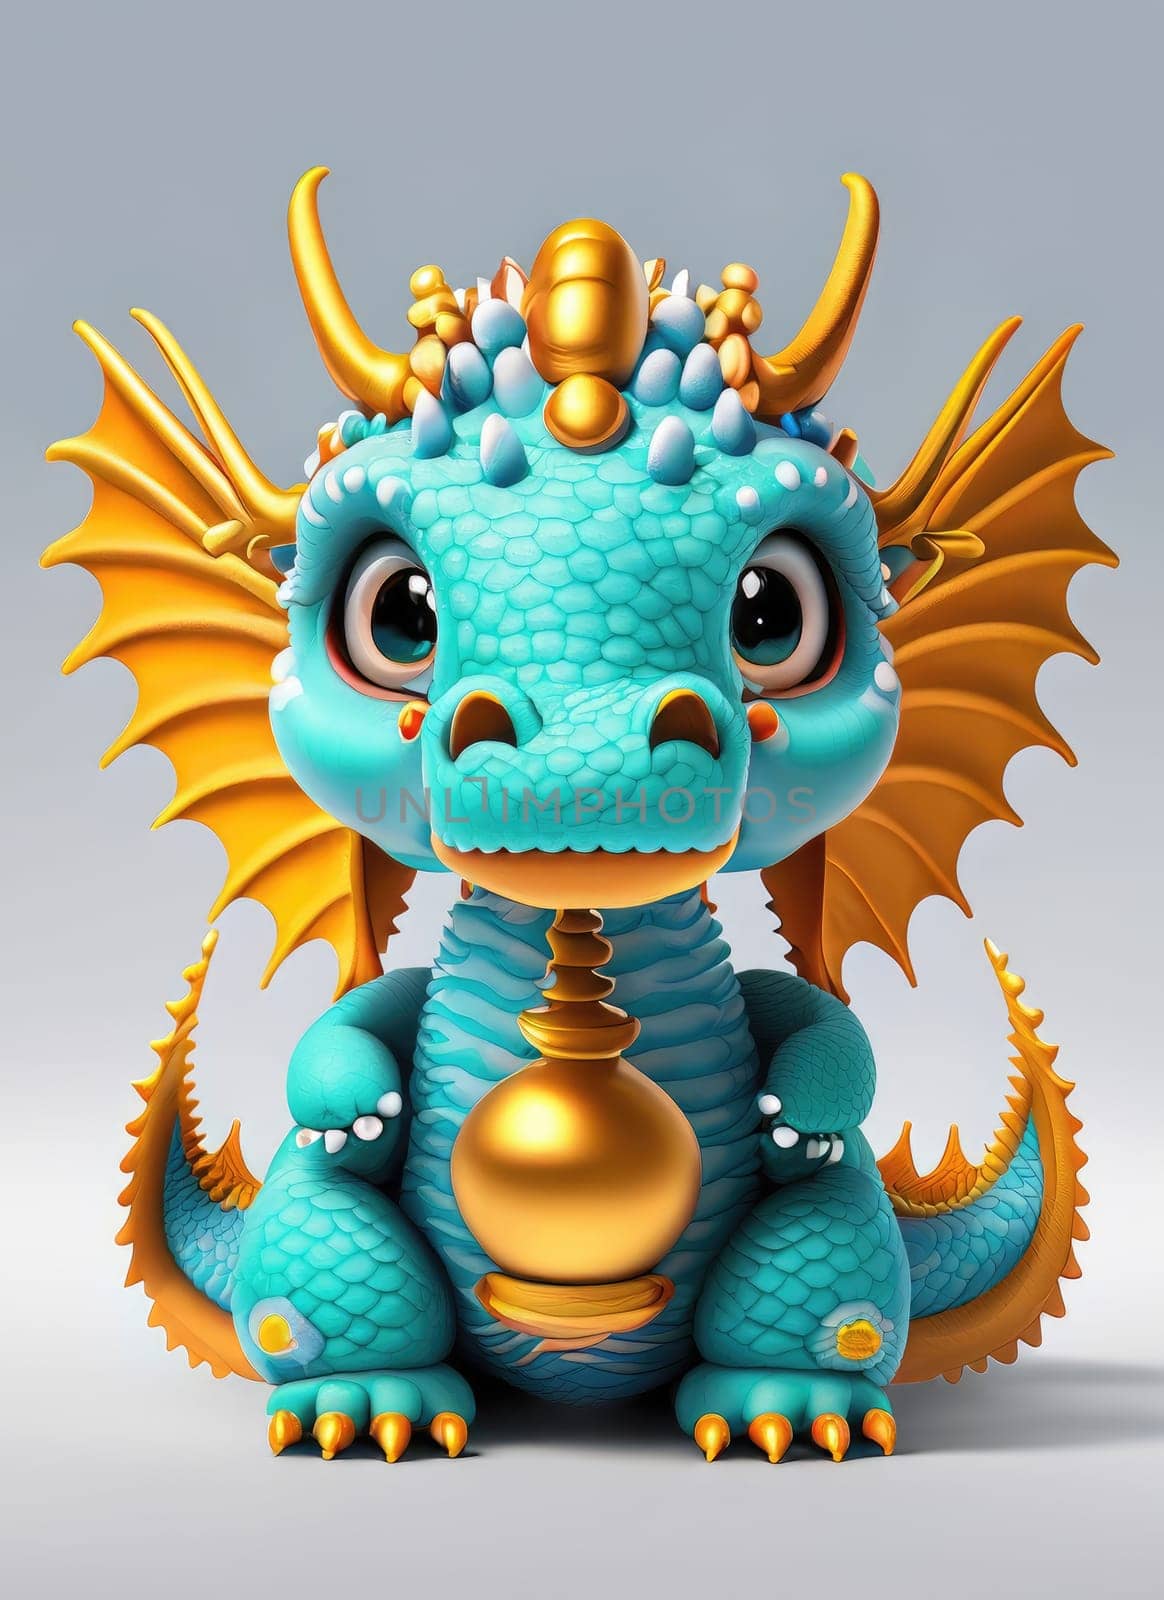 A Kawaii Baby Dragon. Bright and colorful 3D render computer generated. Adorable dragon baby with large eyes and realistic scales by PeaceYAY